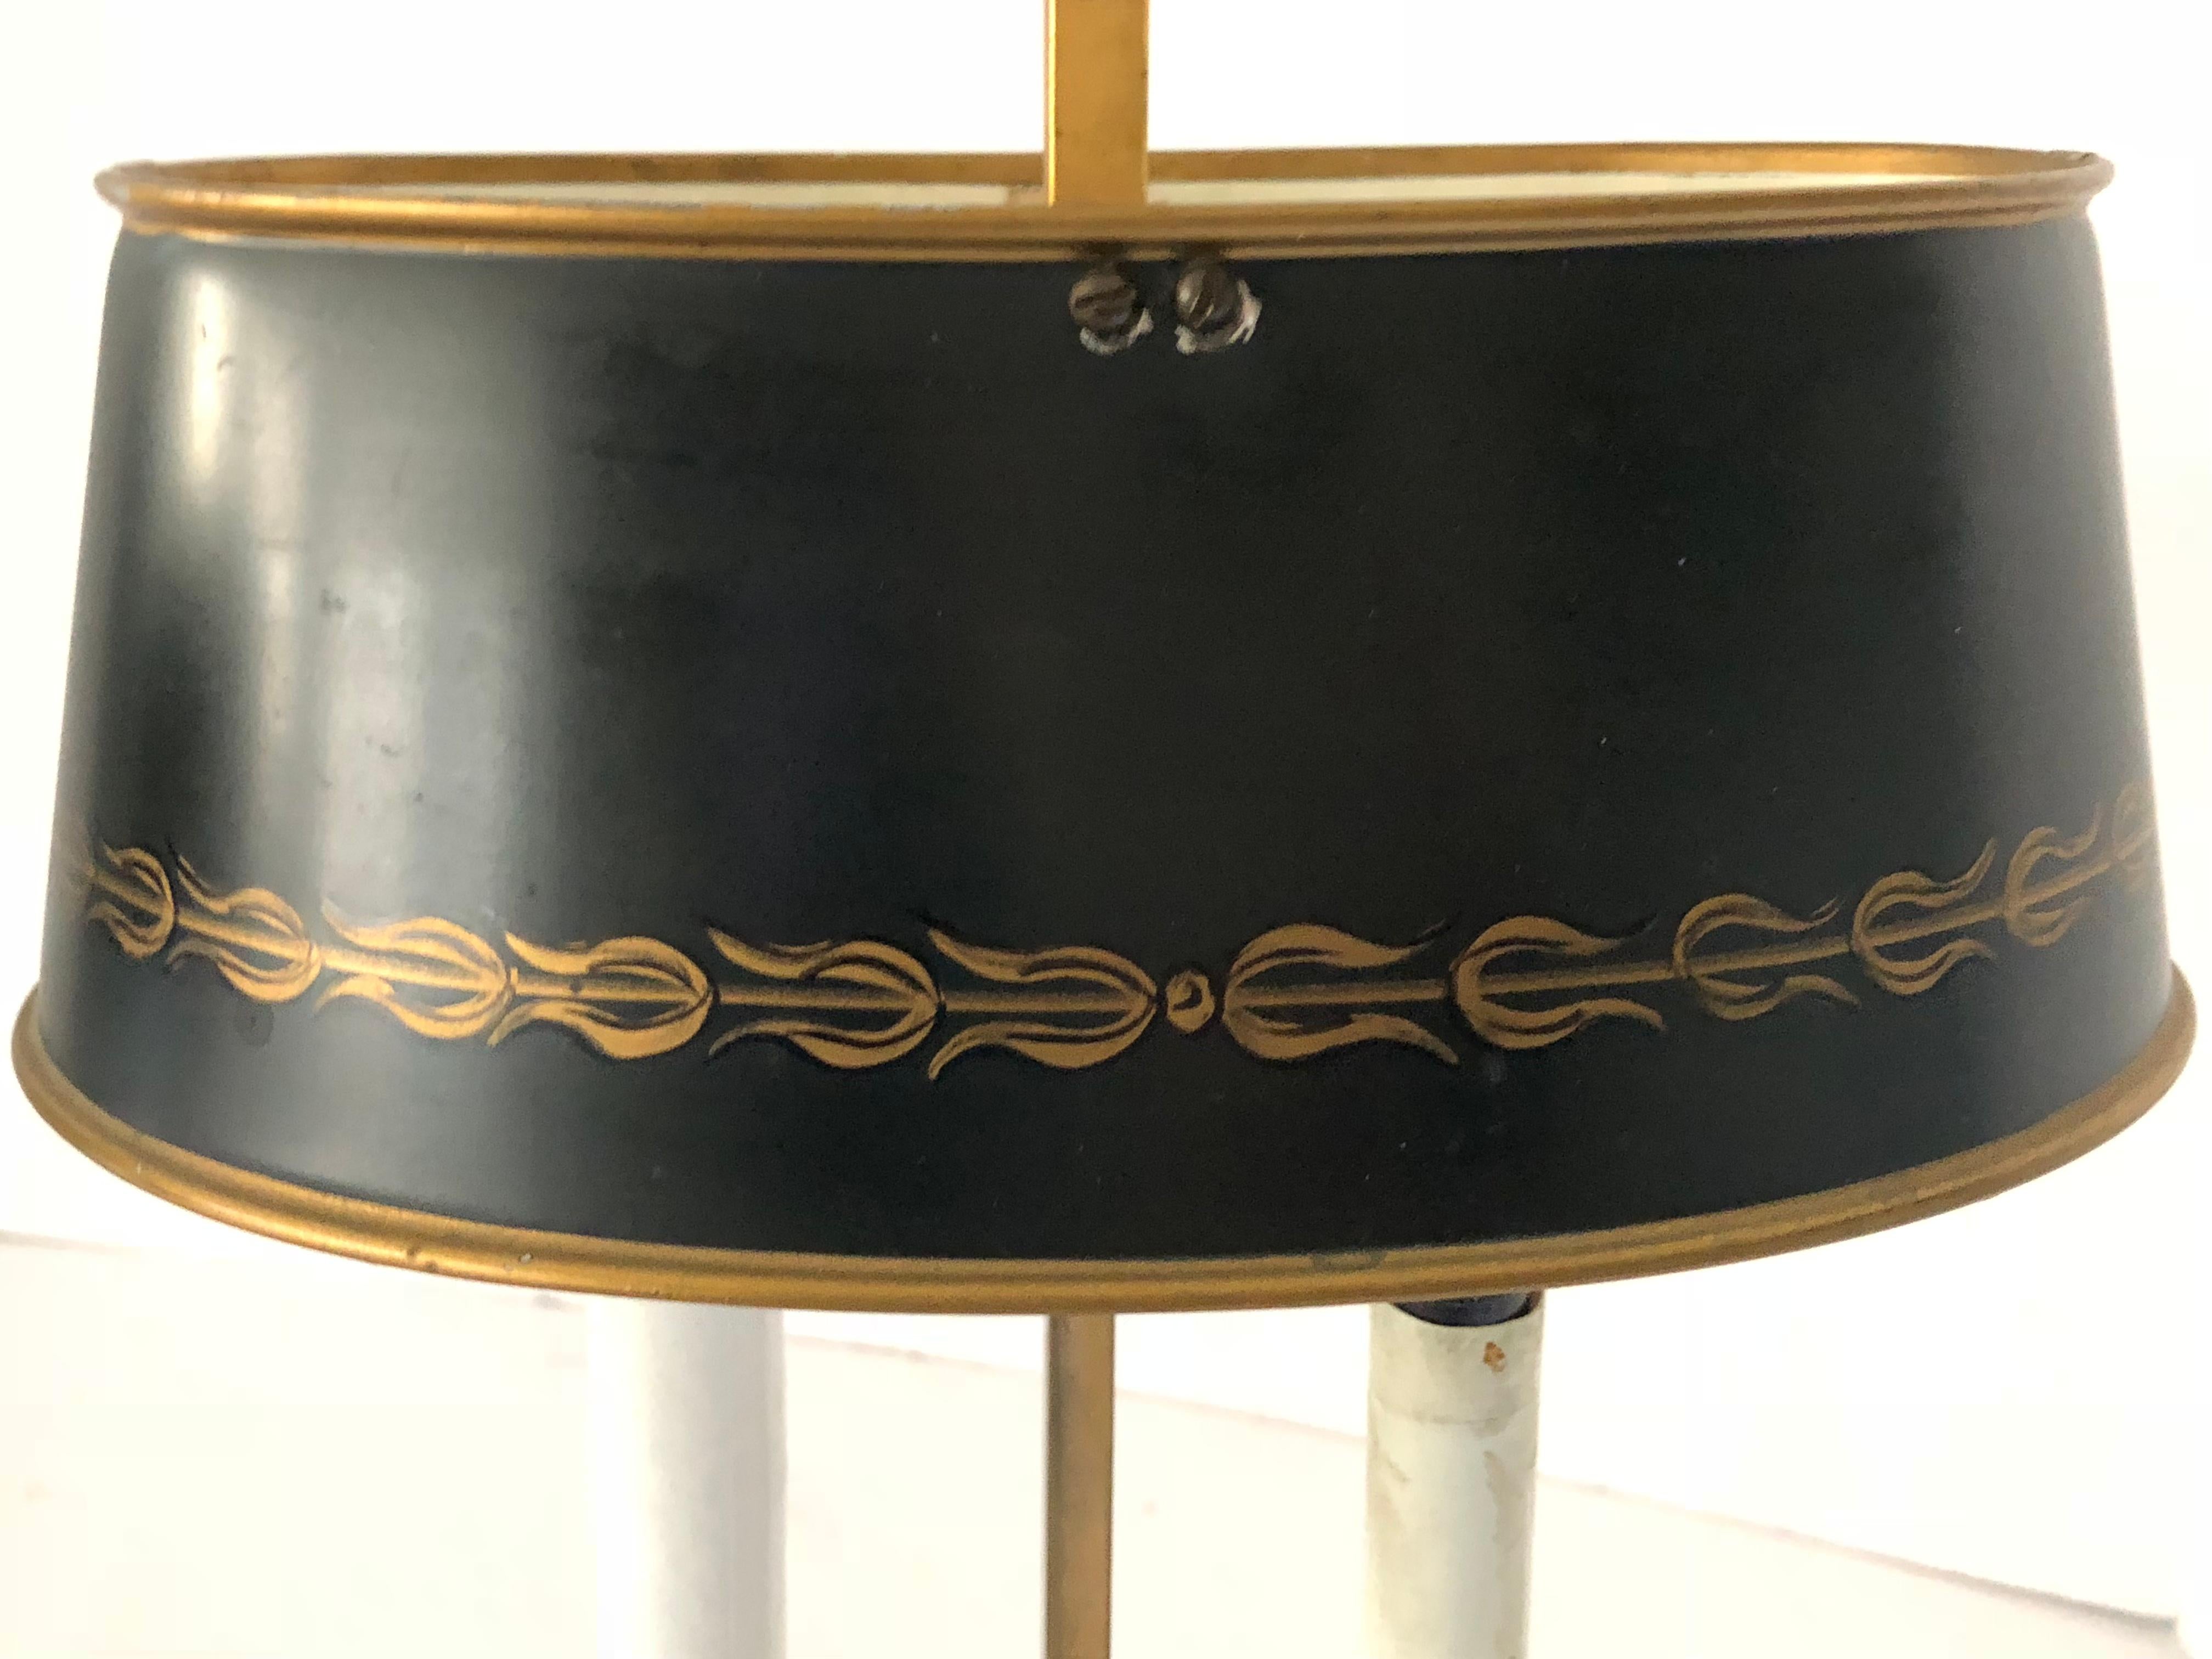 Stunning pair of French bouillotte lamps having two arms (each). The lamps are made of heavy brass that has been gold plated. They each have a black tole shade that is decorated with gold leaf around the bottom. Shades can be raised and lowered.